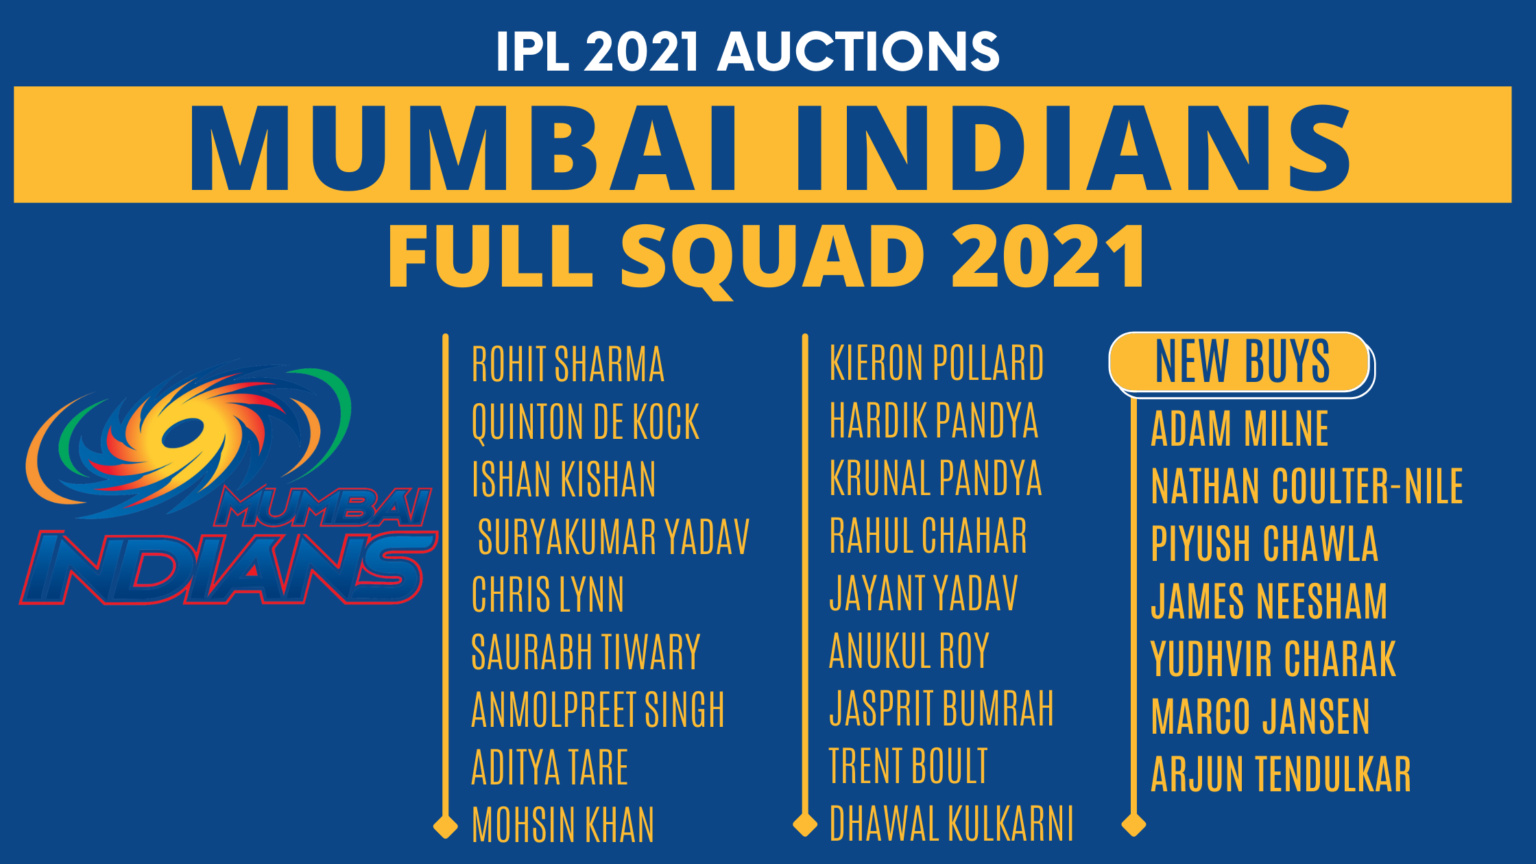 The complete breakdown of IPL 2021 Auction